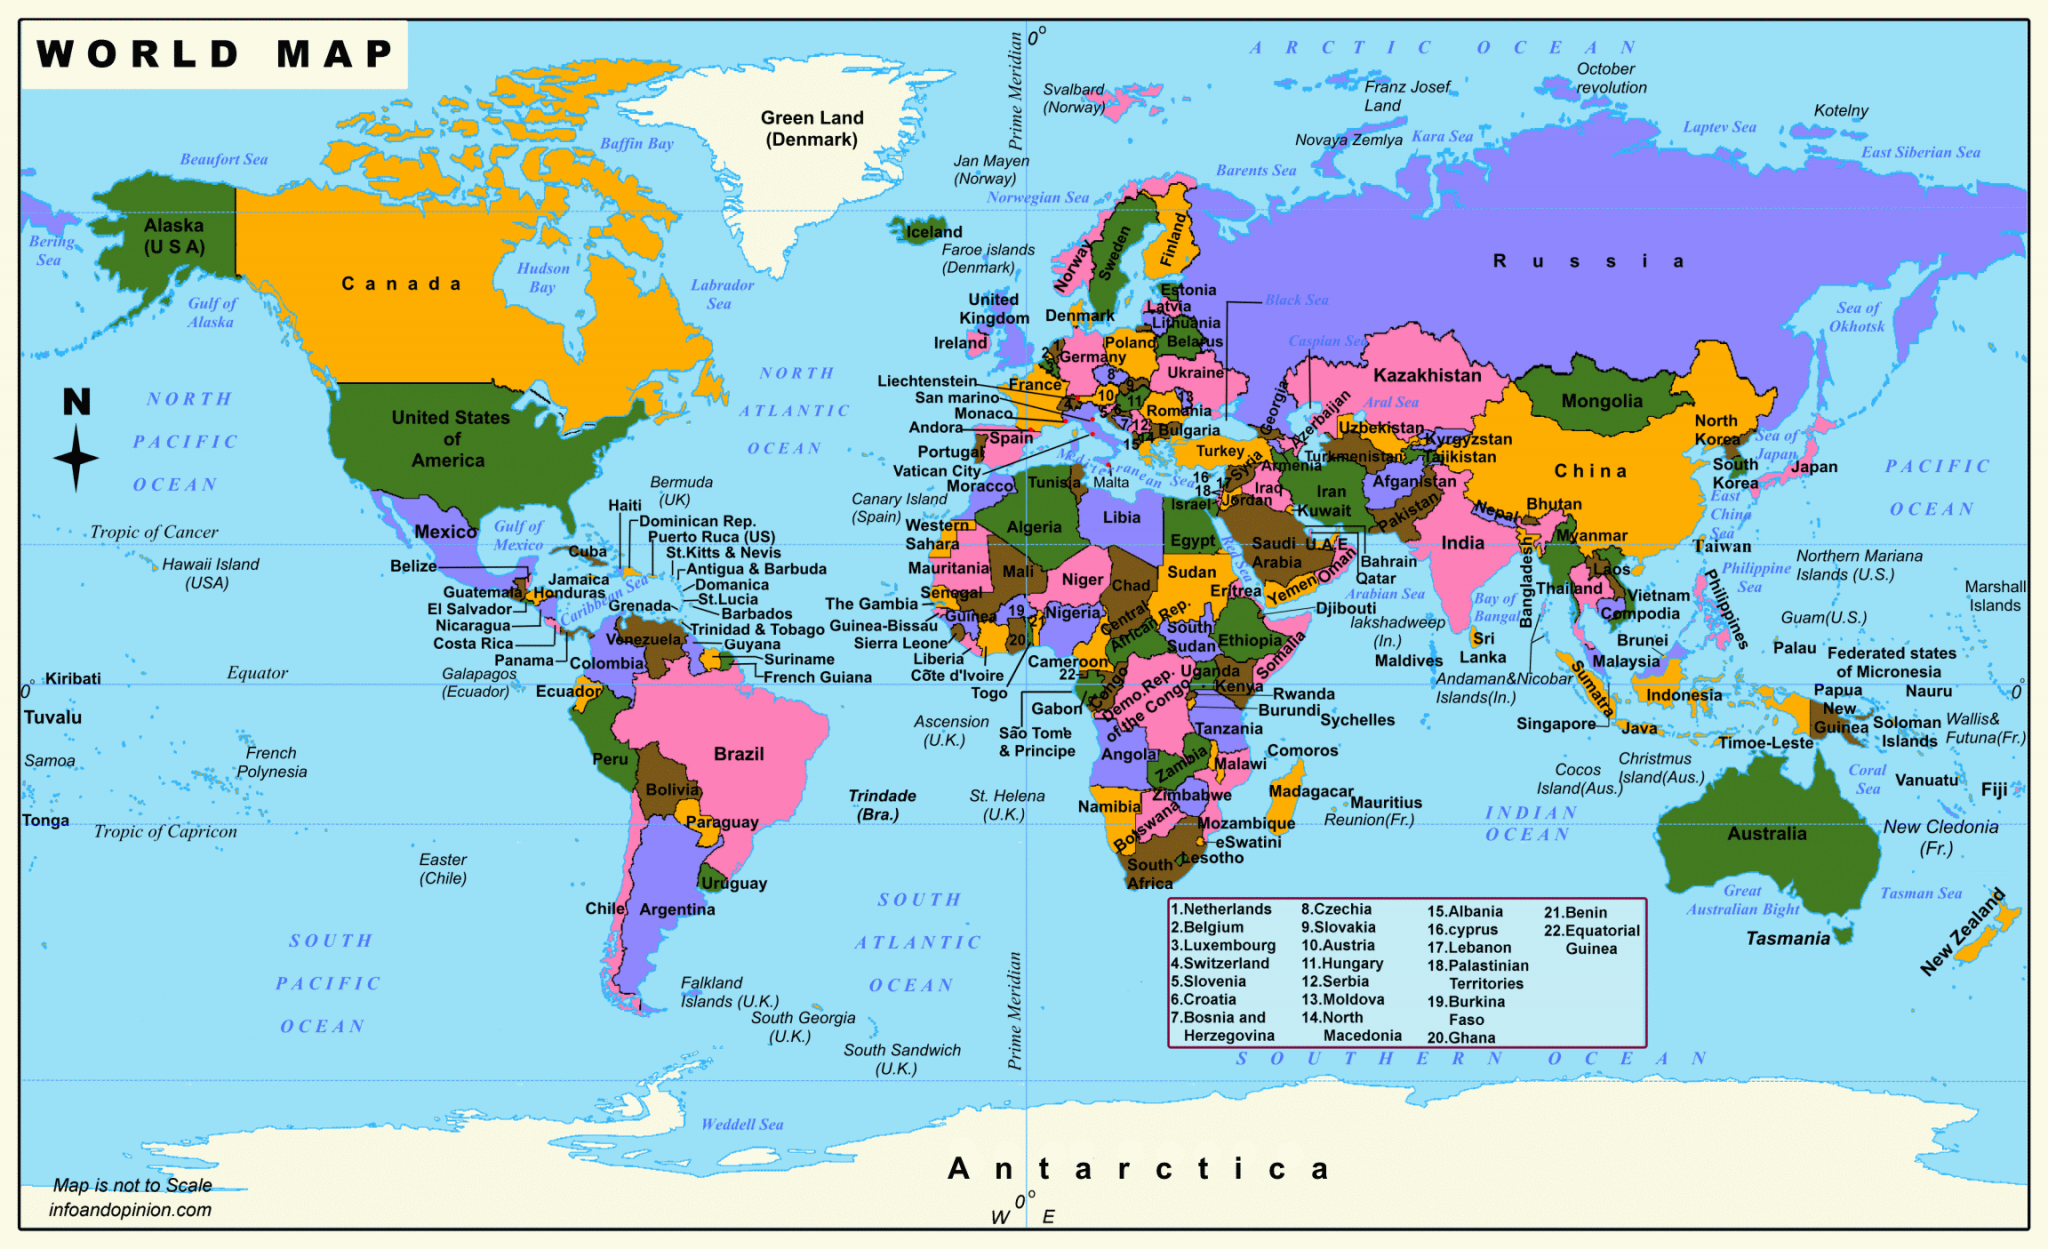 image of world map download free world map in pdf